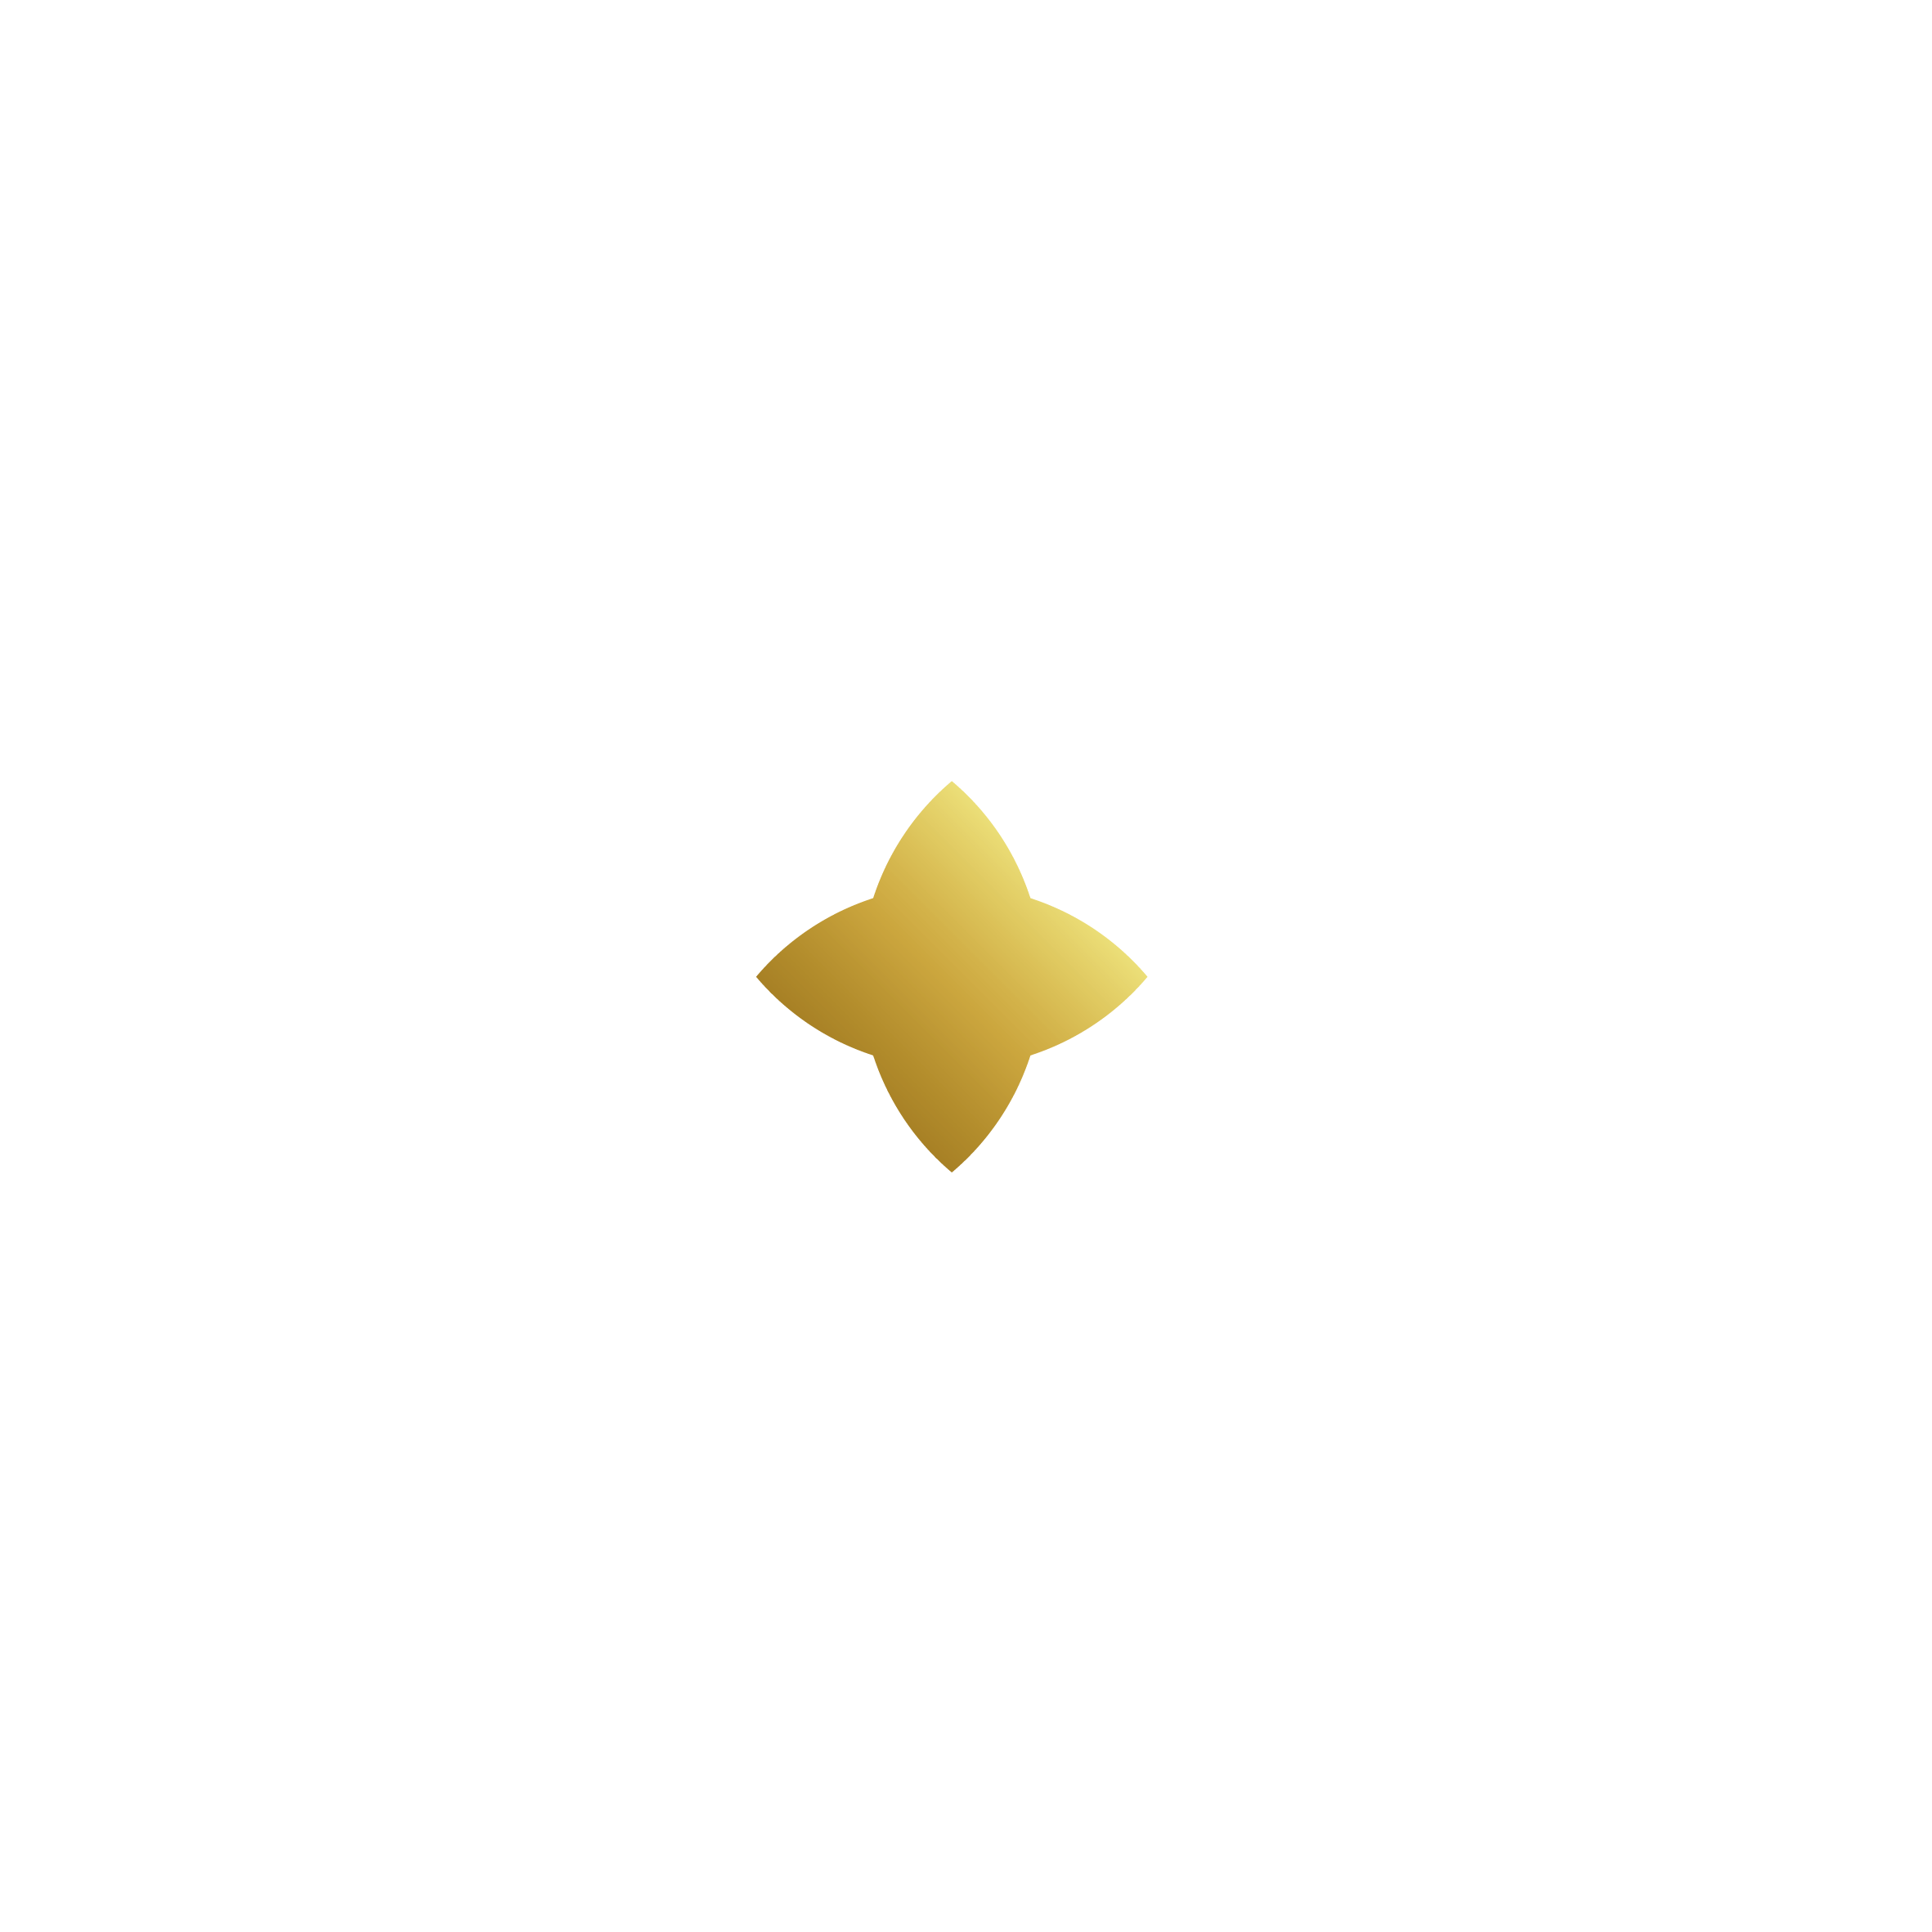 Movement for Good